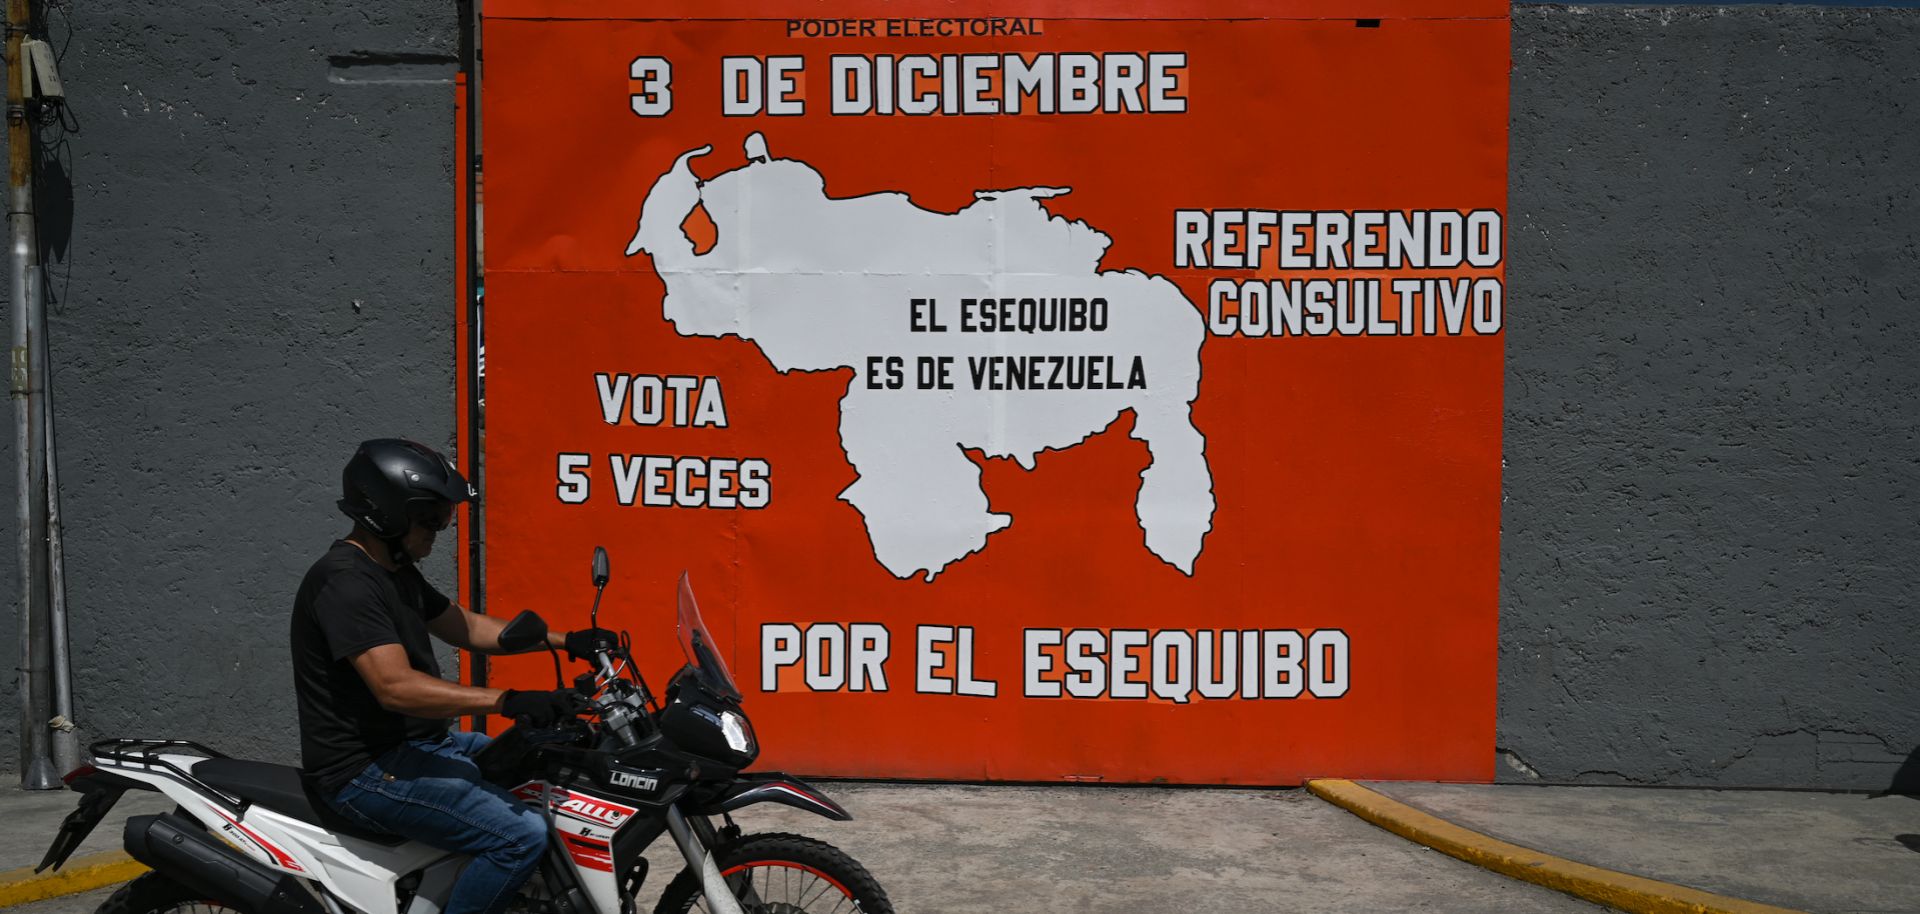 A man on a motorcycle rides past a mural in Caracas, Venezuela, campaigning for a referendum on annexing the Guyana-administered region of Essequibo on Nov. 28, 2023. 